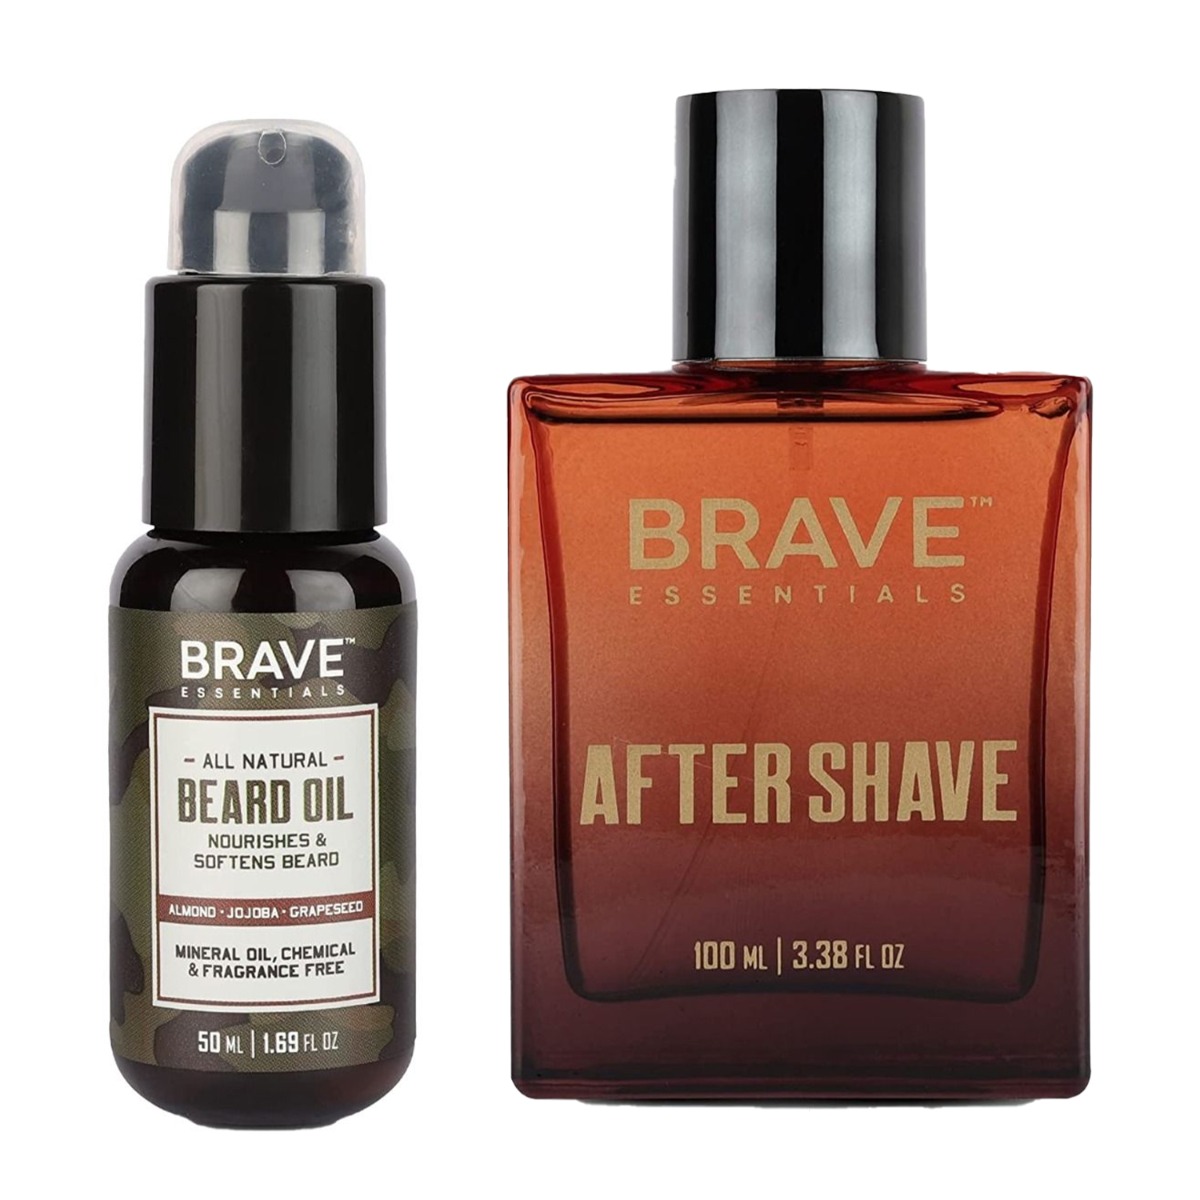 Brave Essentials All Natural Beard Oil, 50ml &  After Shave, 100ml